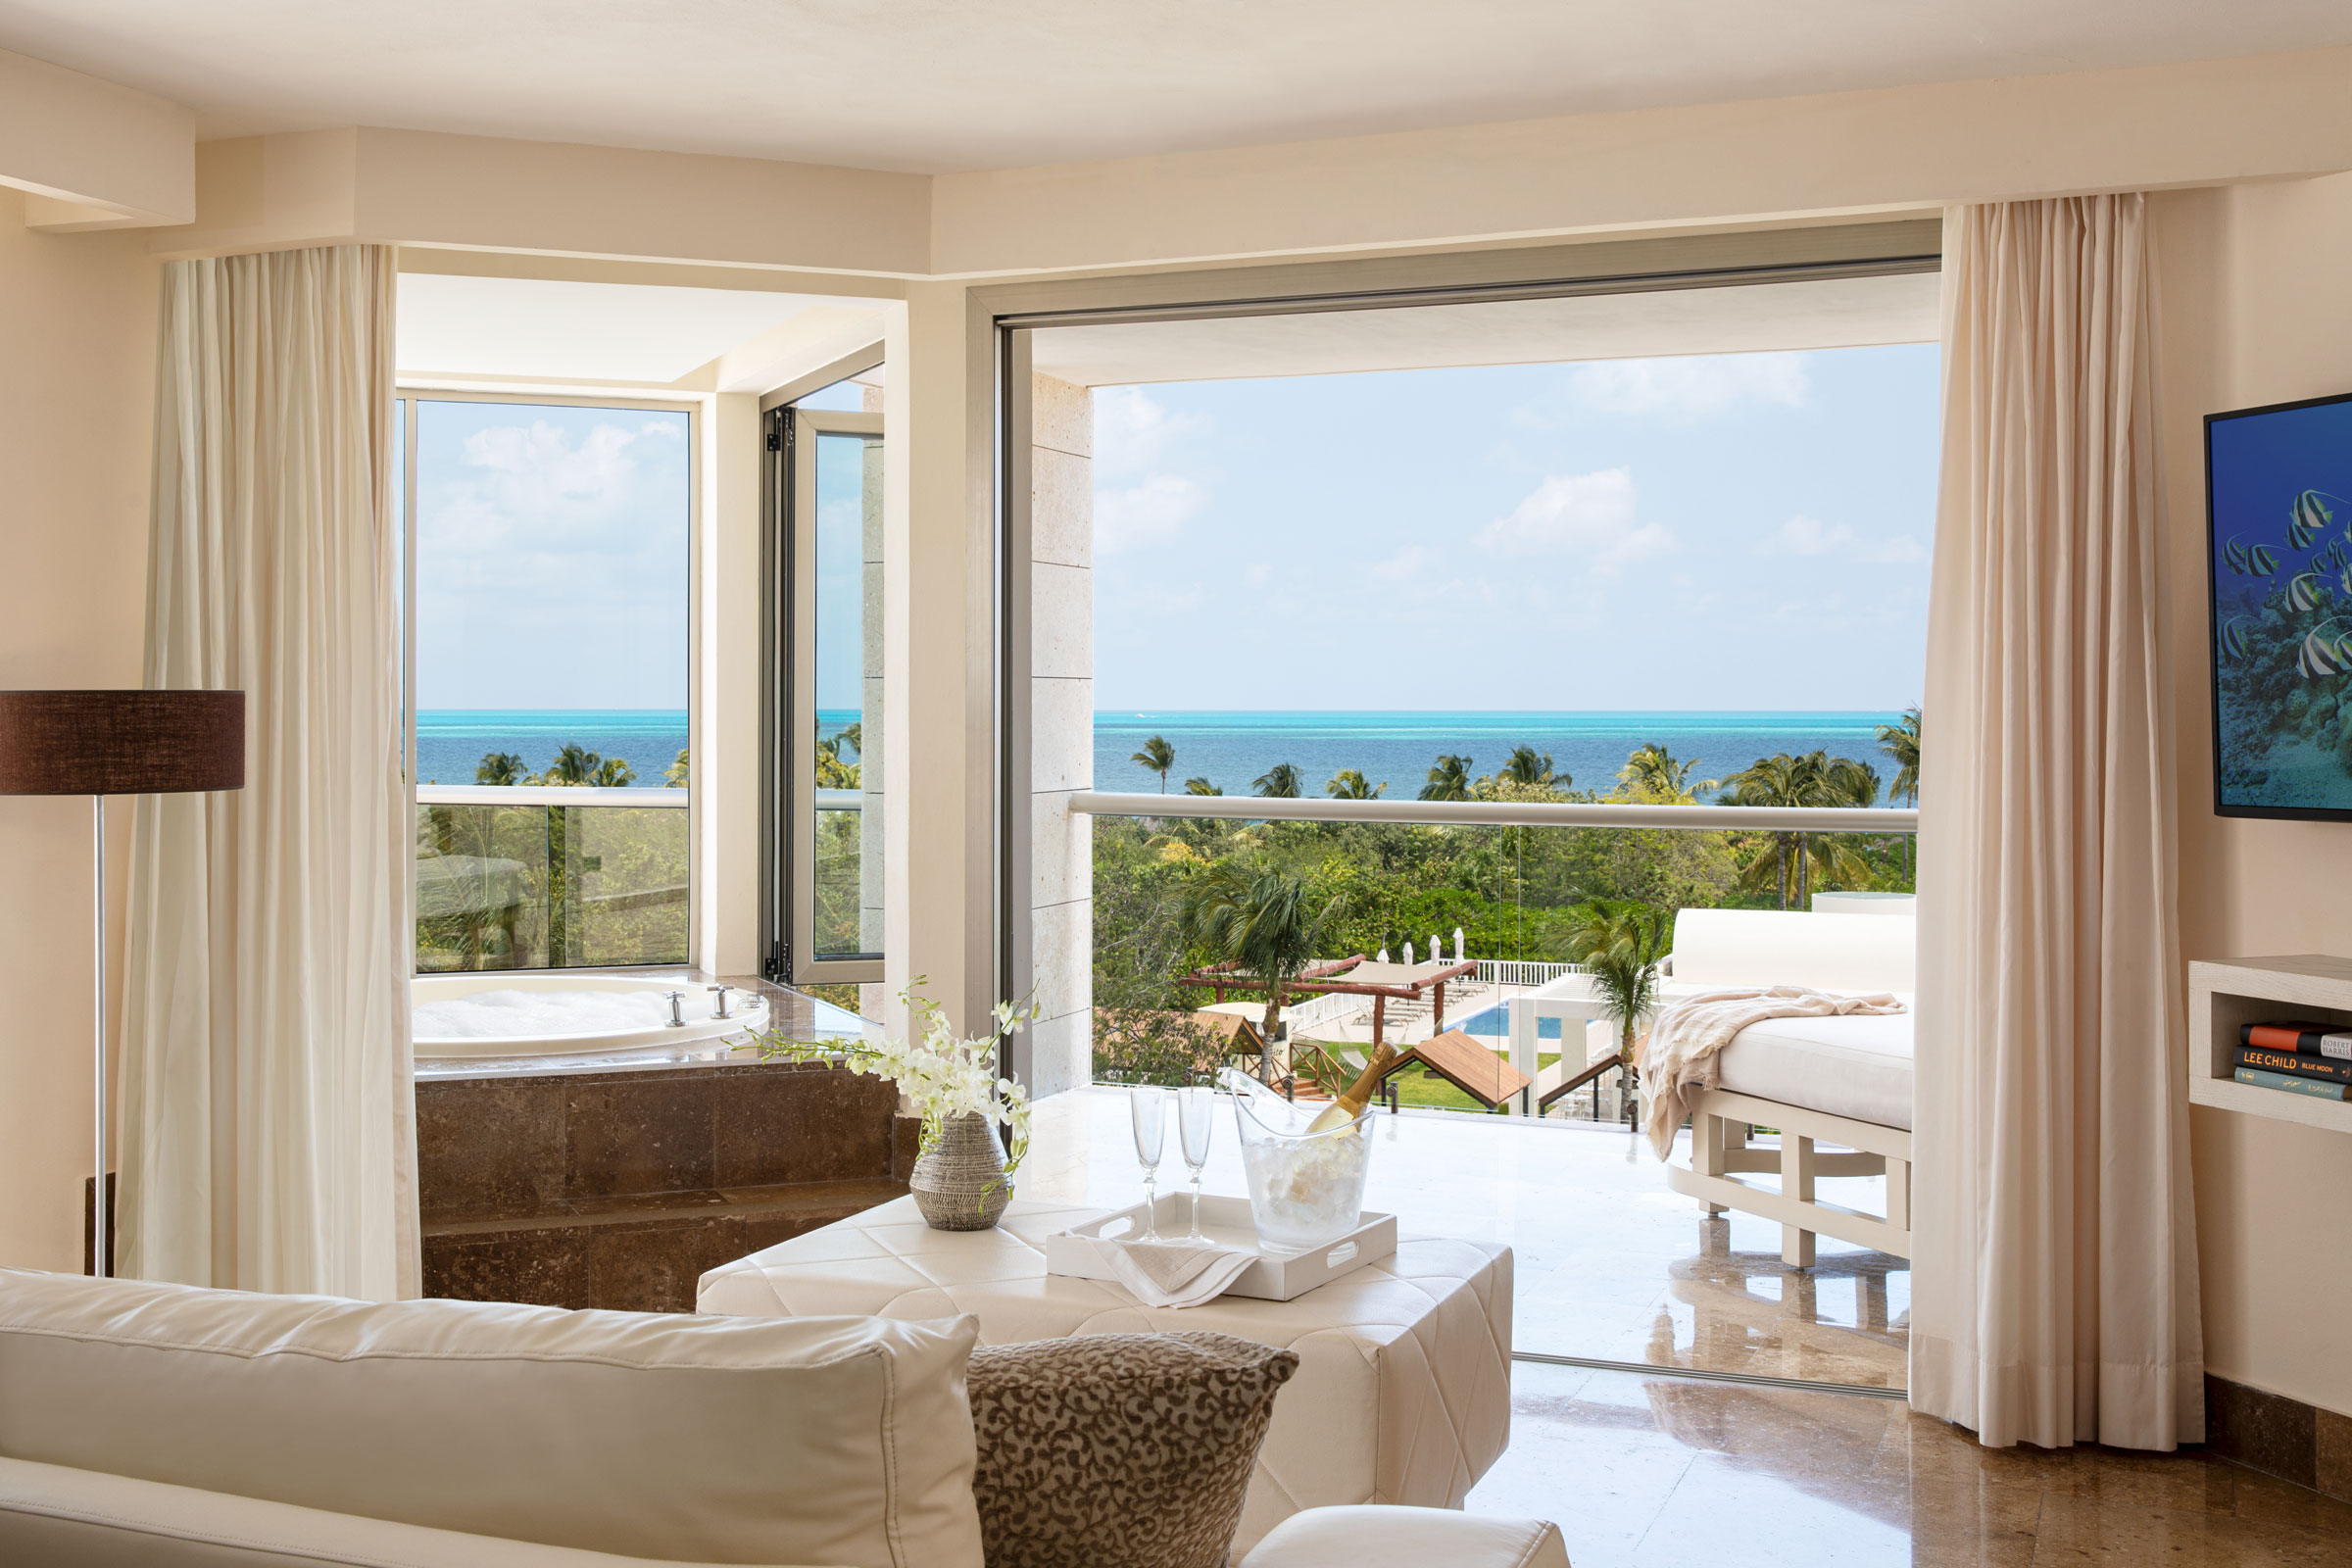 Upgrade your romantic experiences in cancun with a honeymoon suite